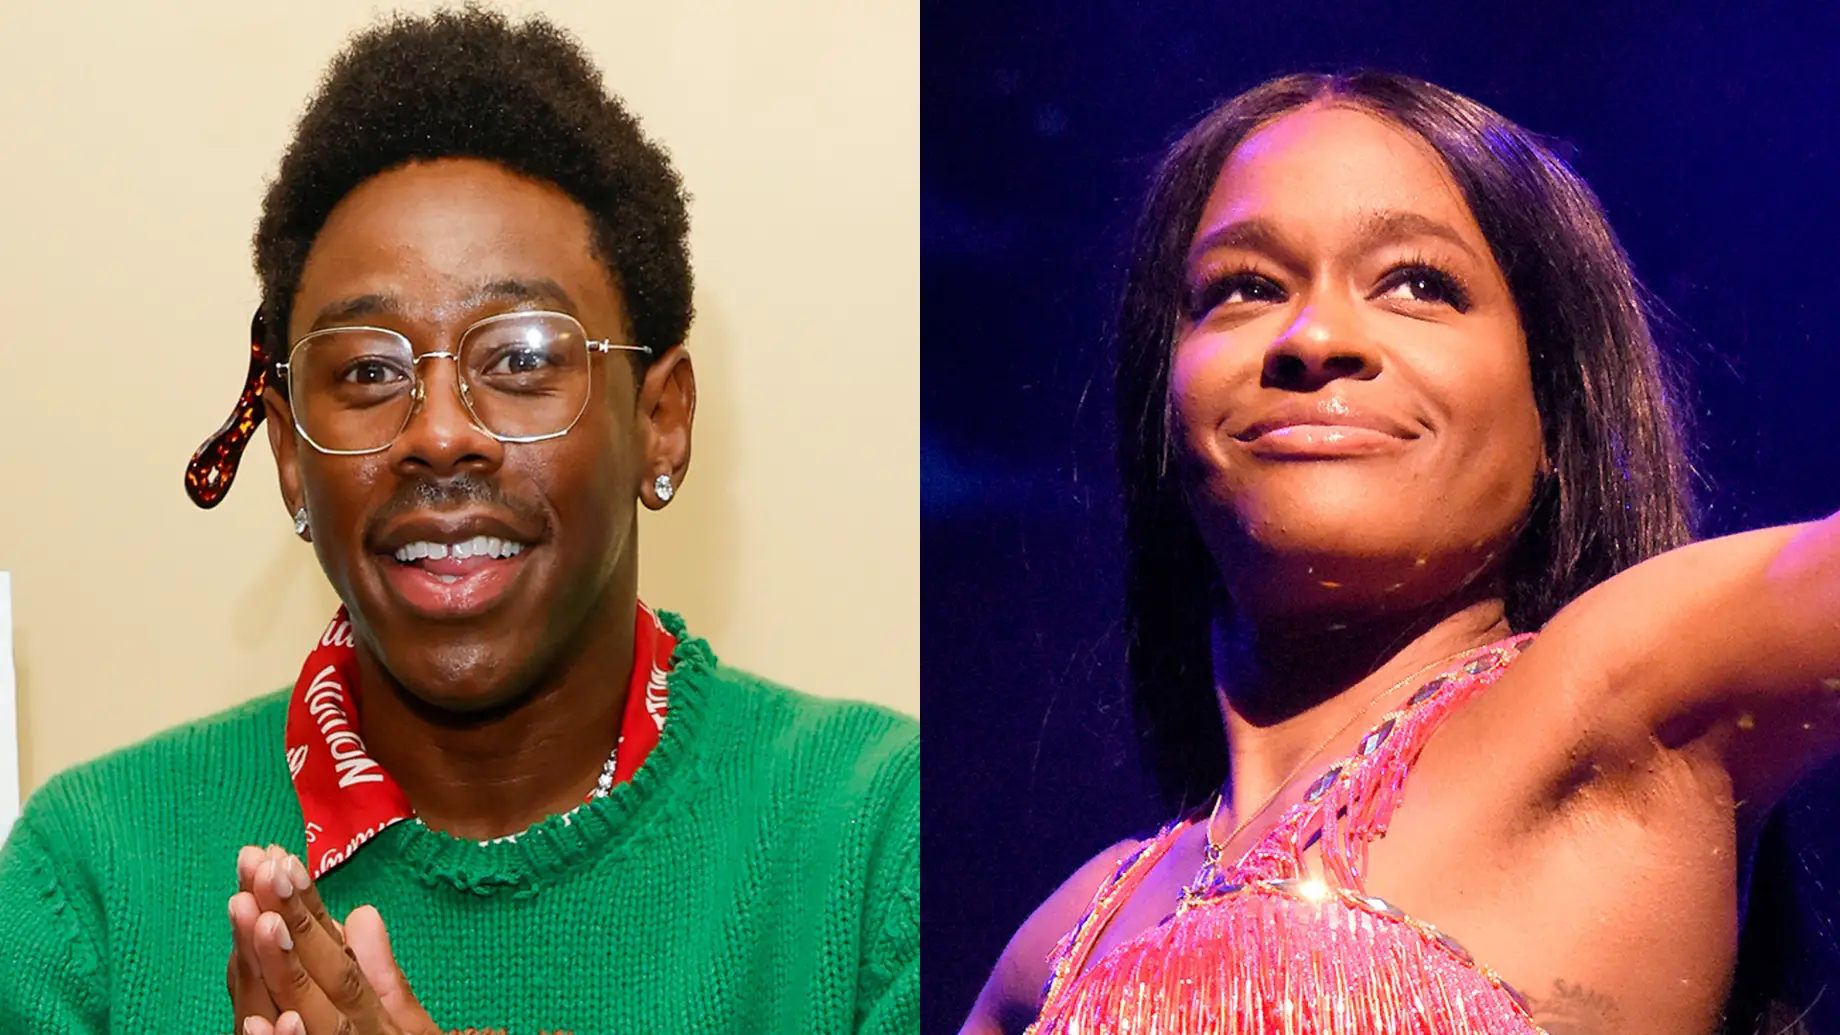 Tyler, the Creator Responds to Azealia Banks Saying He and Lil Nas X Should ‘Get Over White Bussy’ and Be a Power Couple